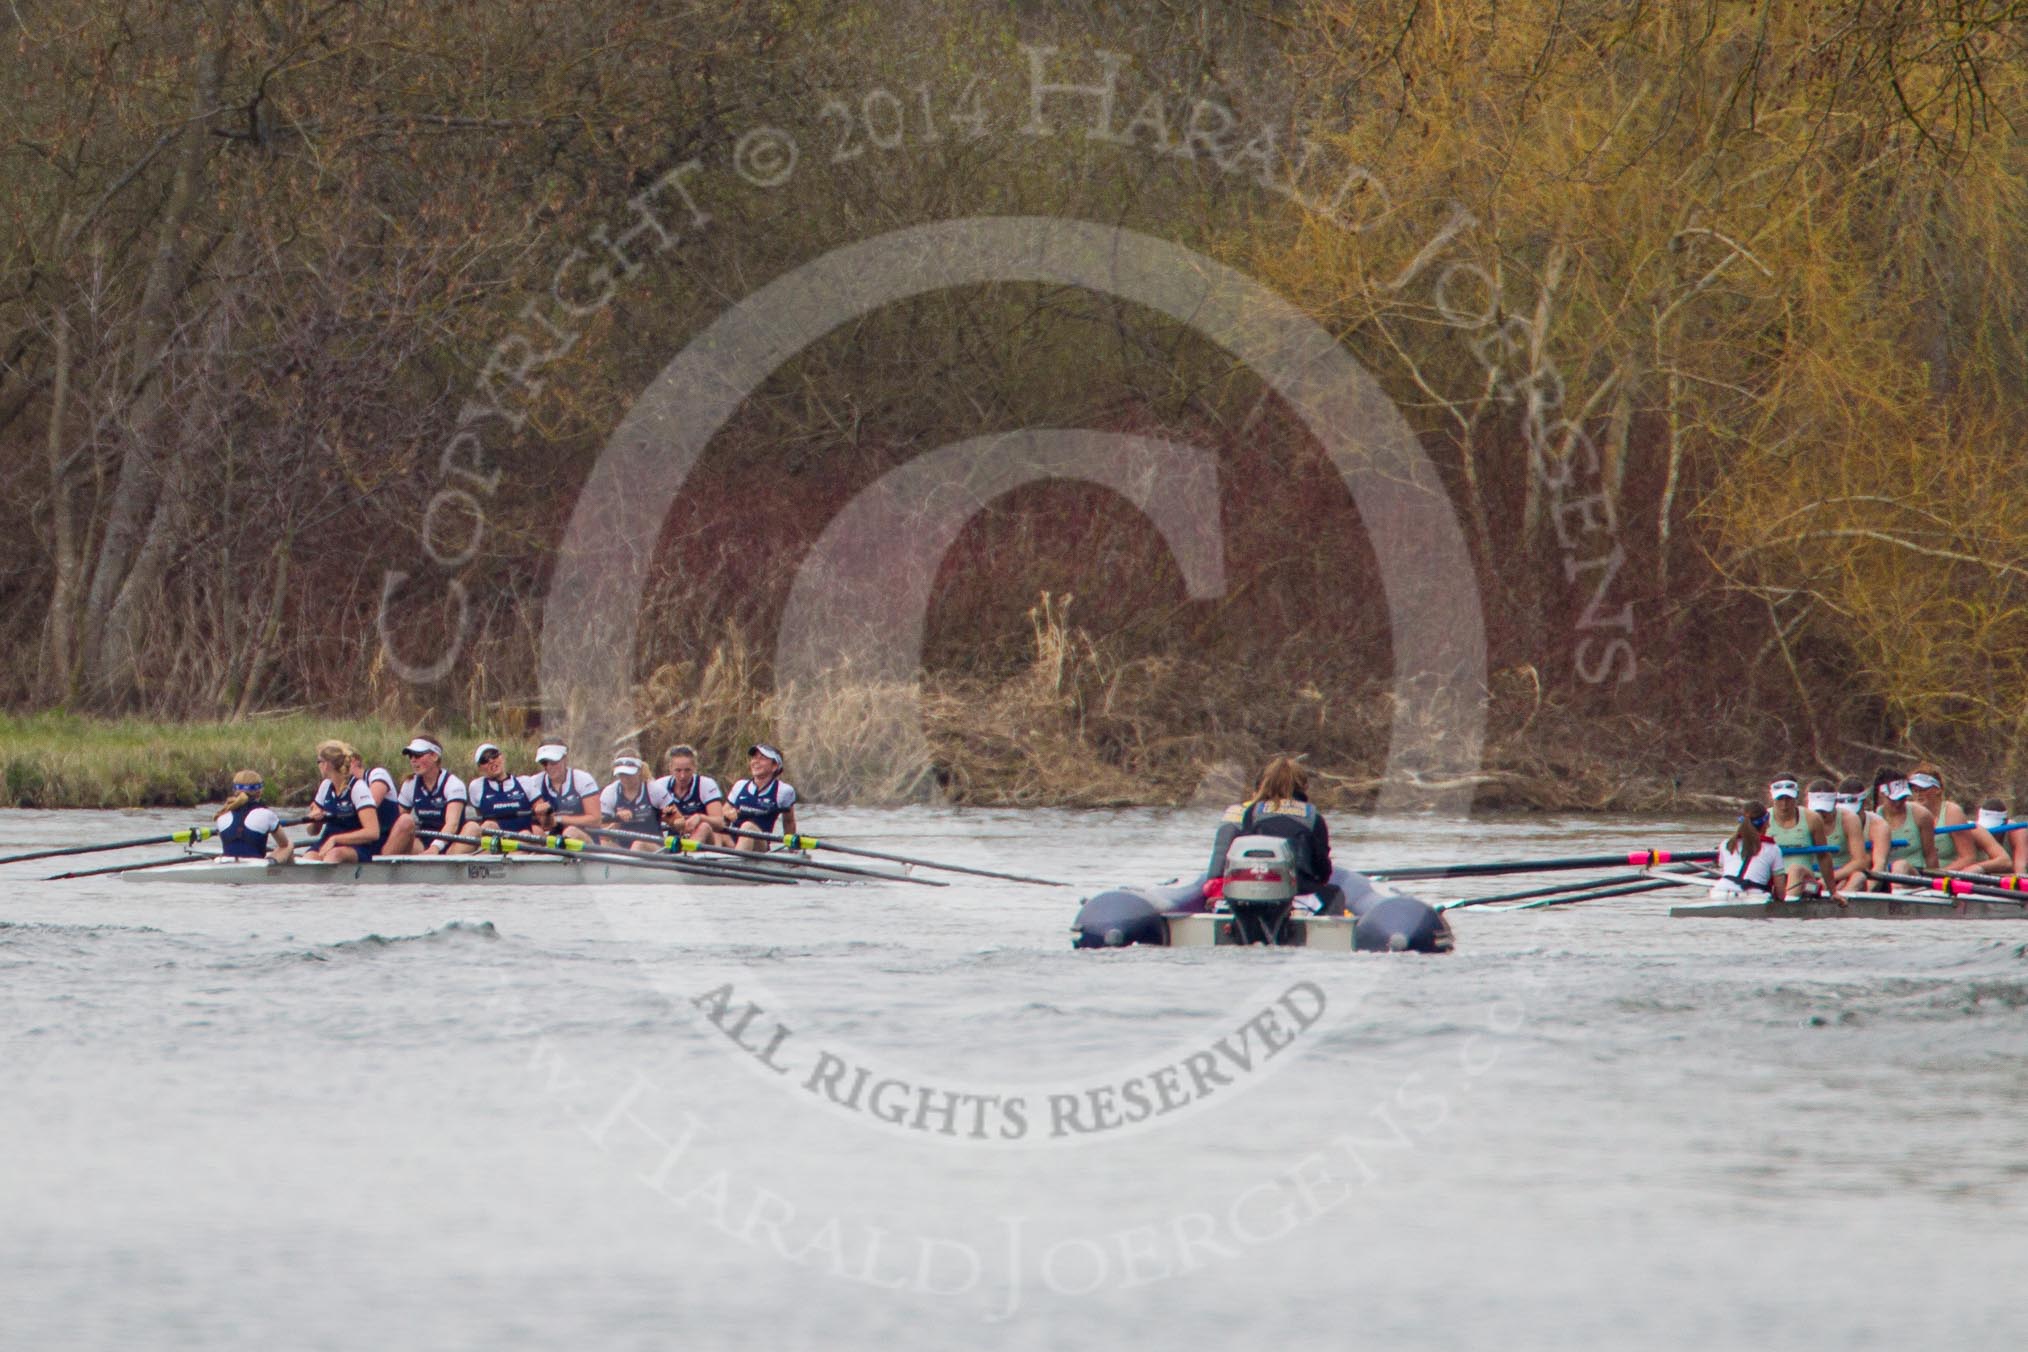 The Women's Boat Race and Henley Boat Races 2014: The Newton Women's Boat Race - the Oxford and Cambridge crews resting for a moment after the race..
River Thames,
Henley-on-Thames,
Buckinghamshire,
United Kingdom,
on 30 March 2014 at 15:16, image #326